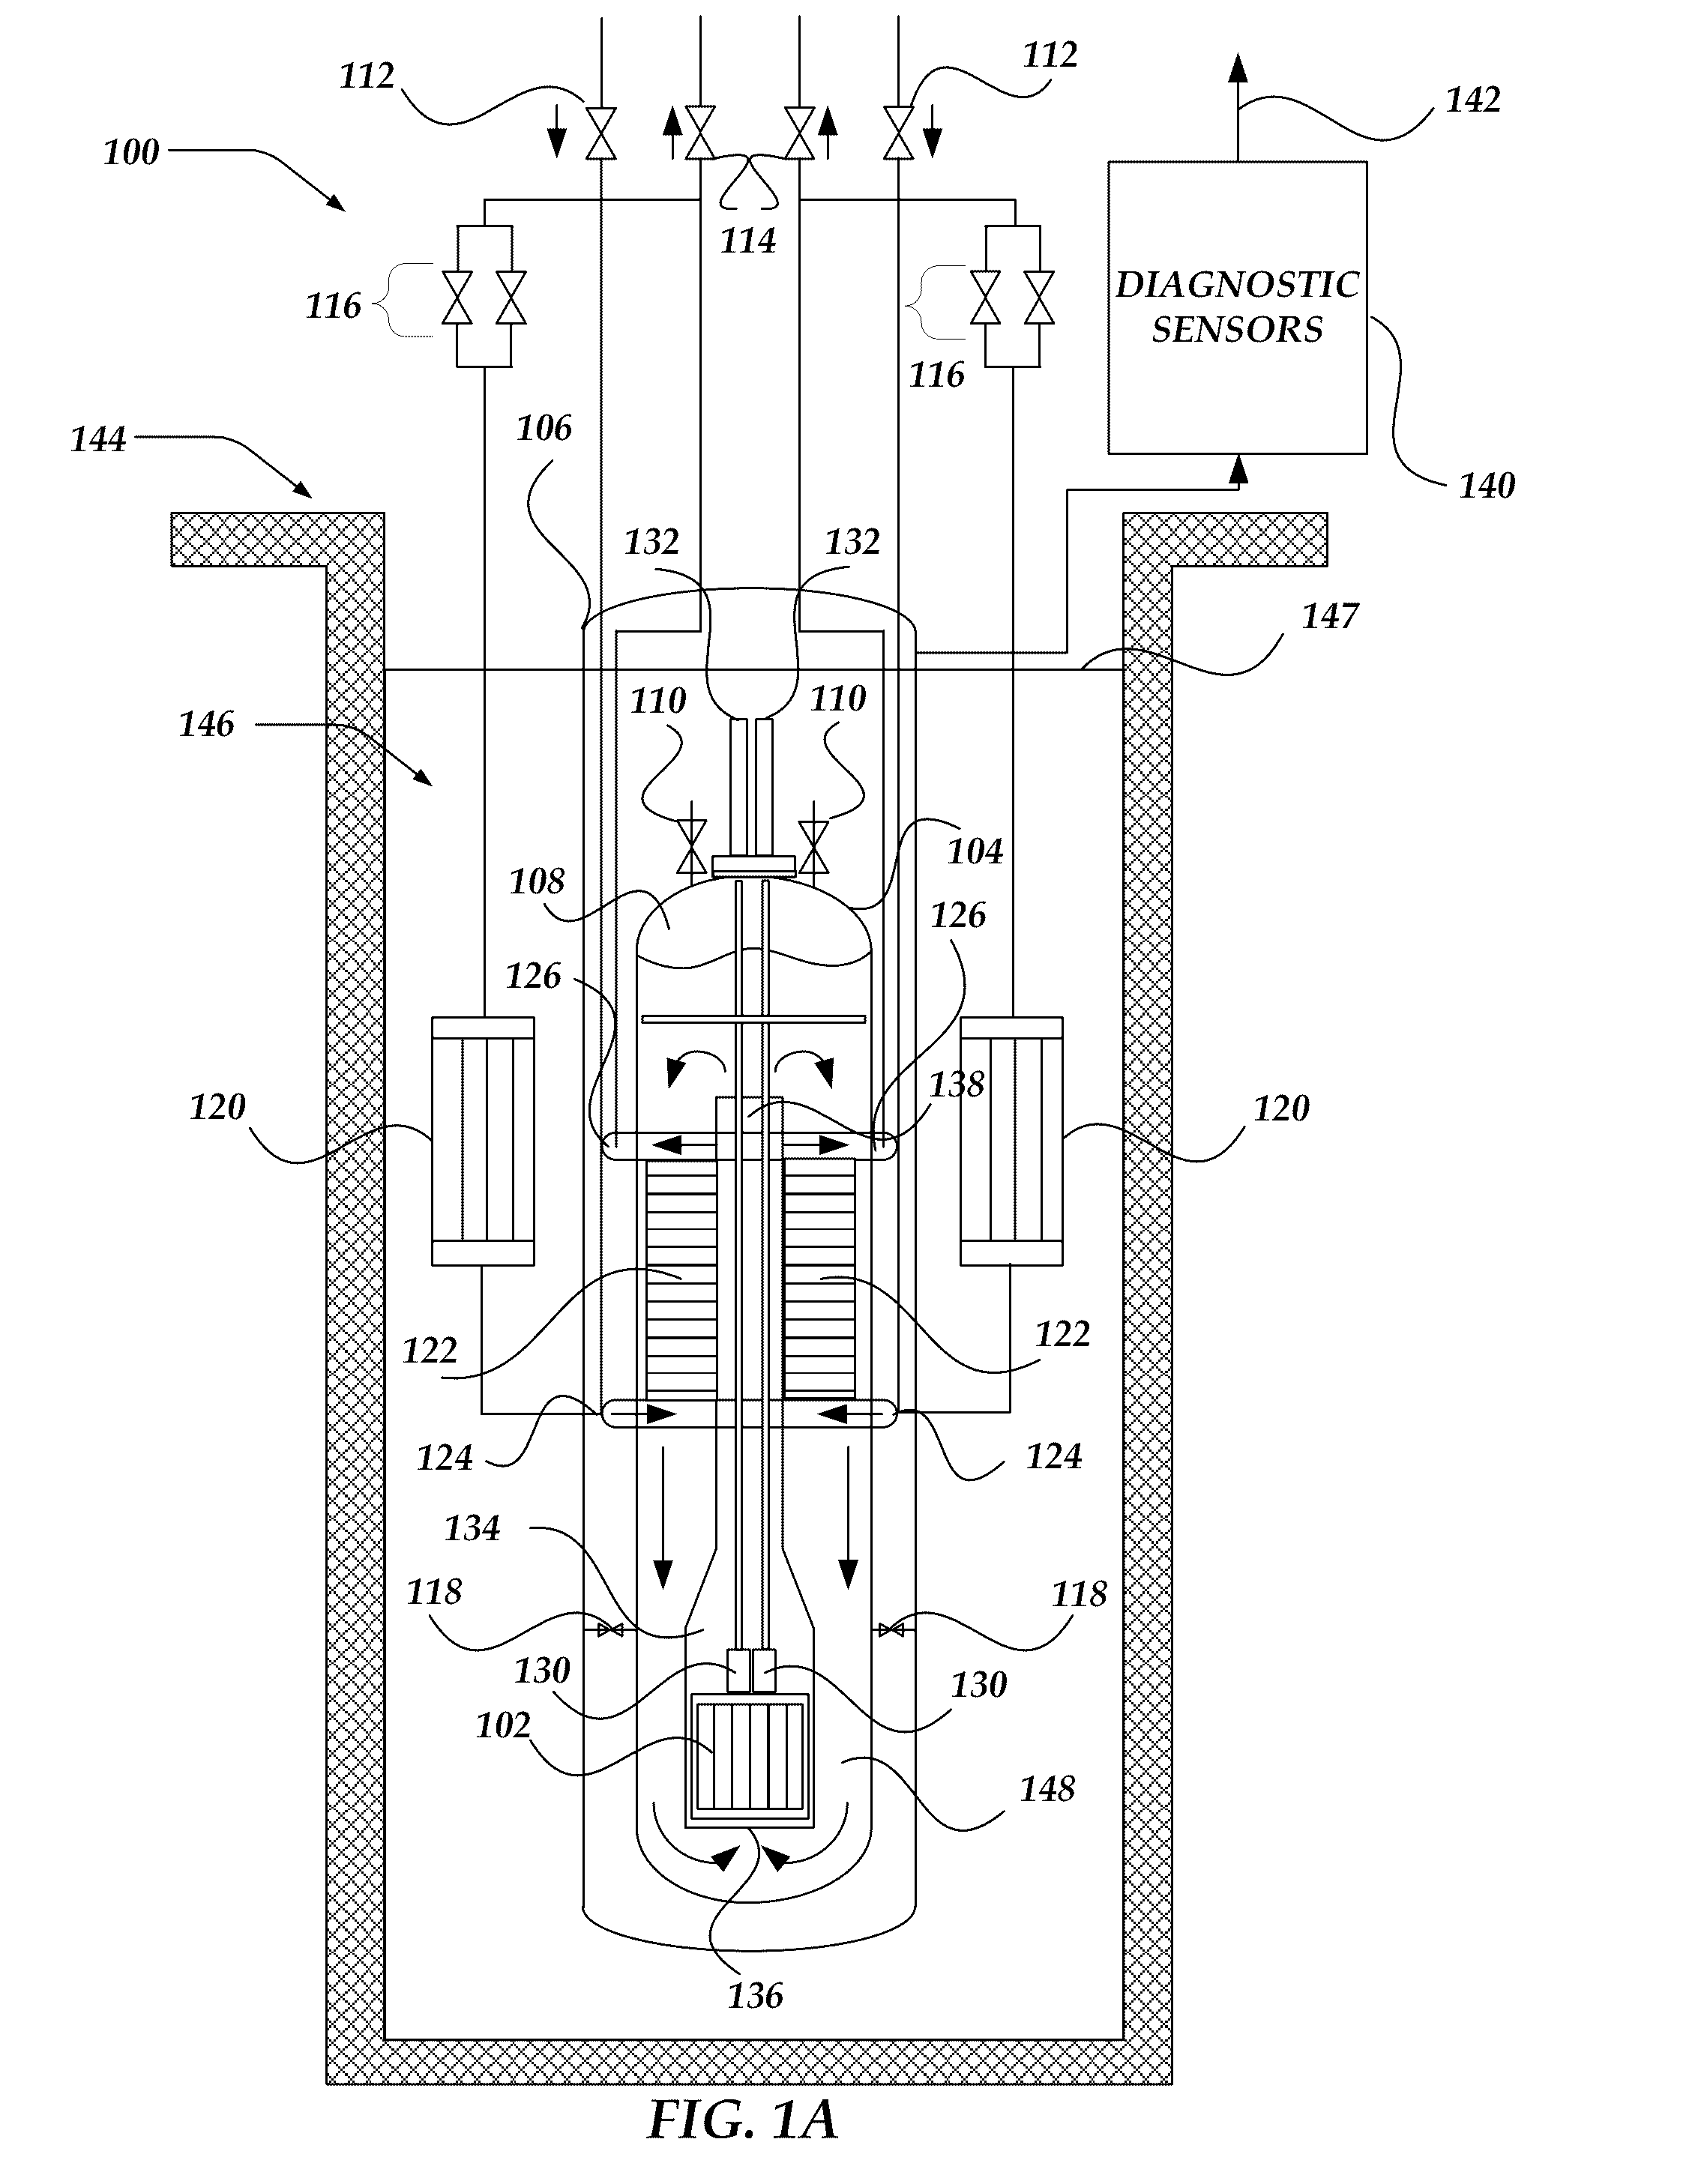 Notification management systems and methods for monitoring the operation of a modular power plant